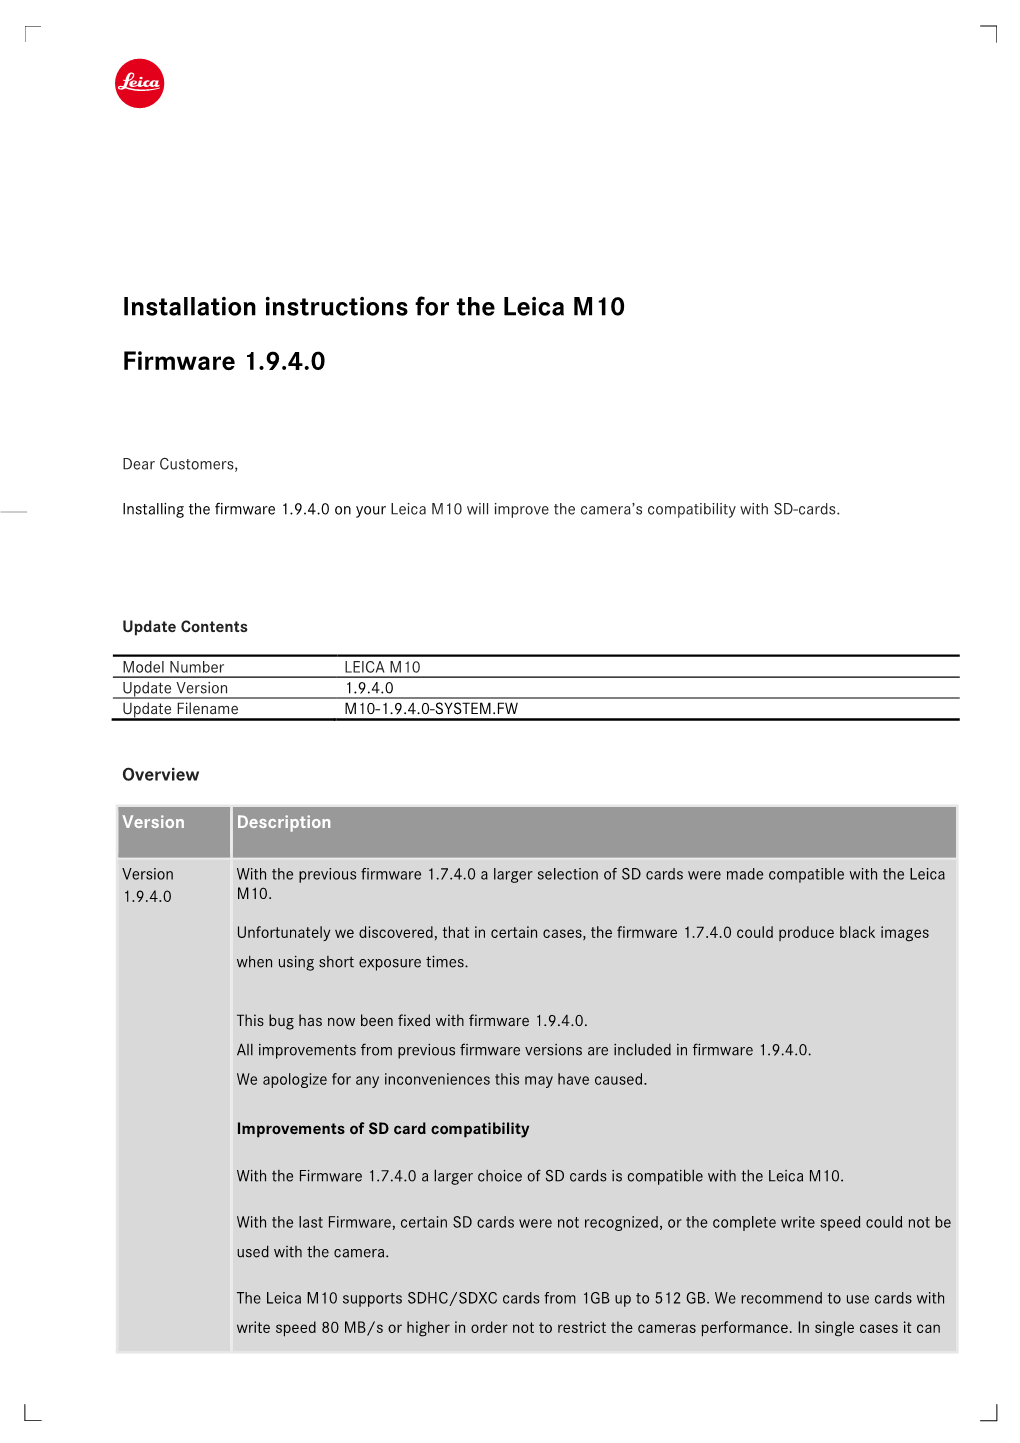 Installation Instructions for the Leica M10 Firmware 1.9.4.0